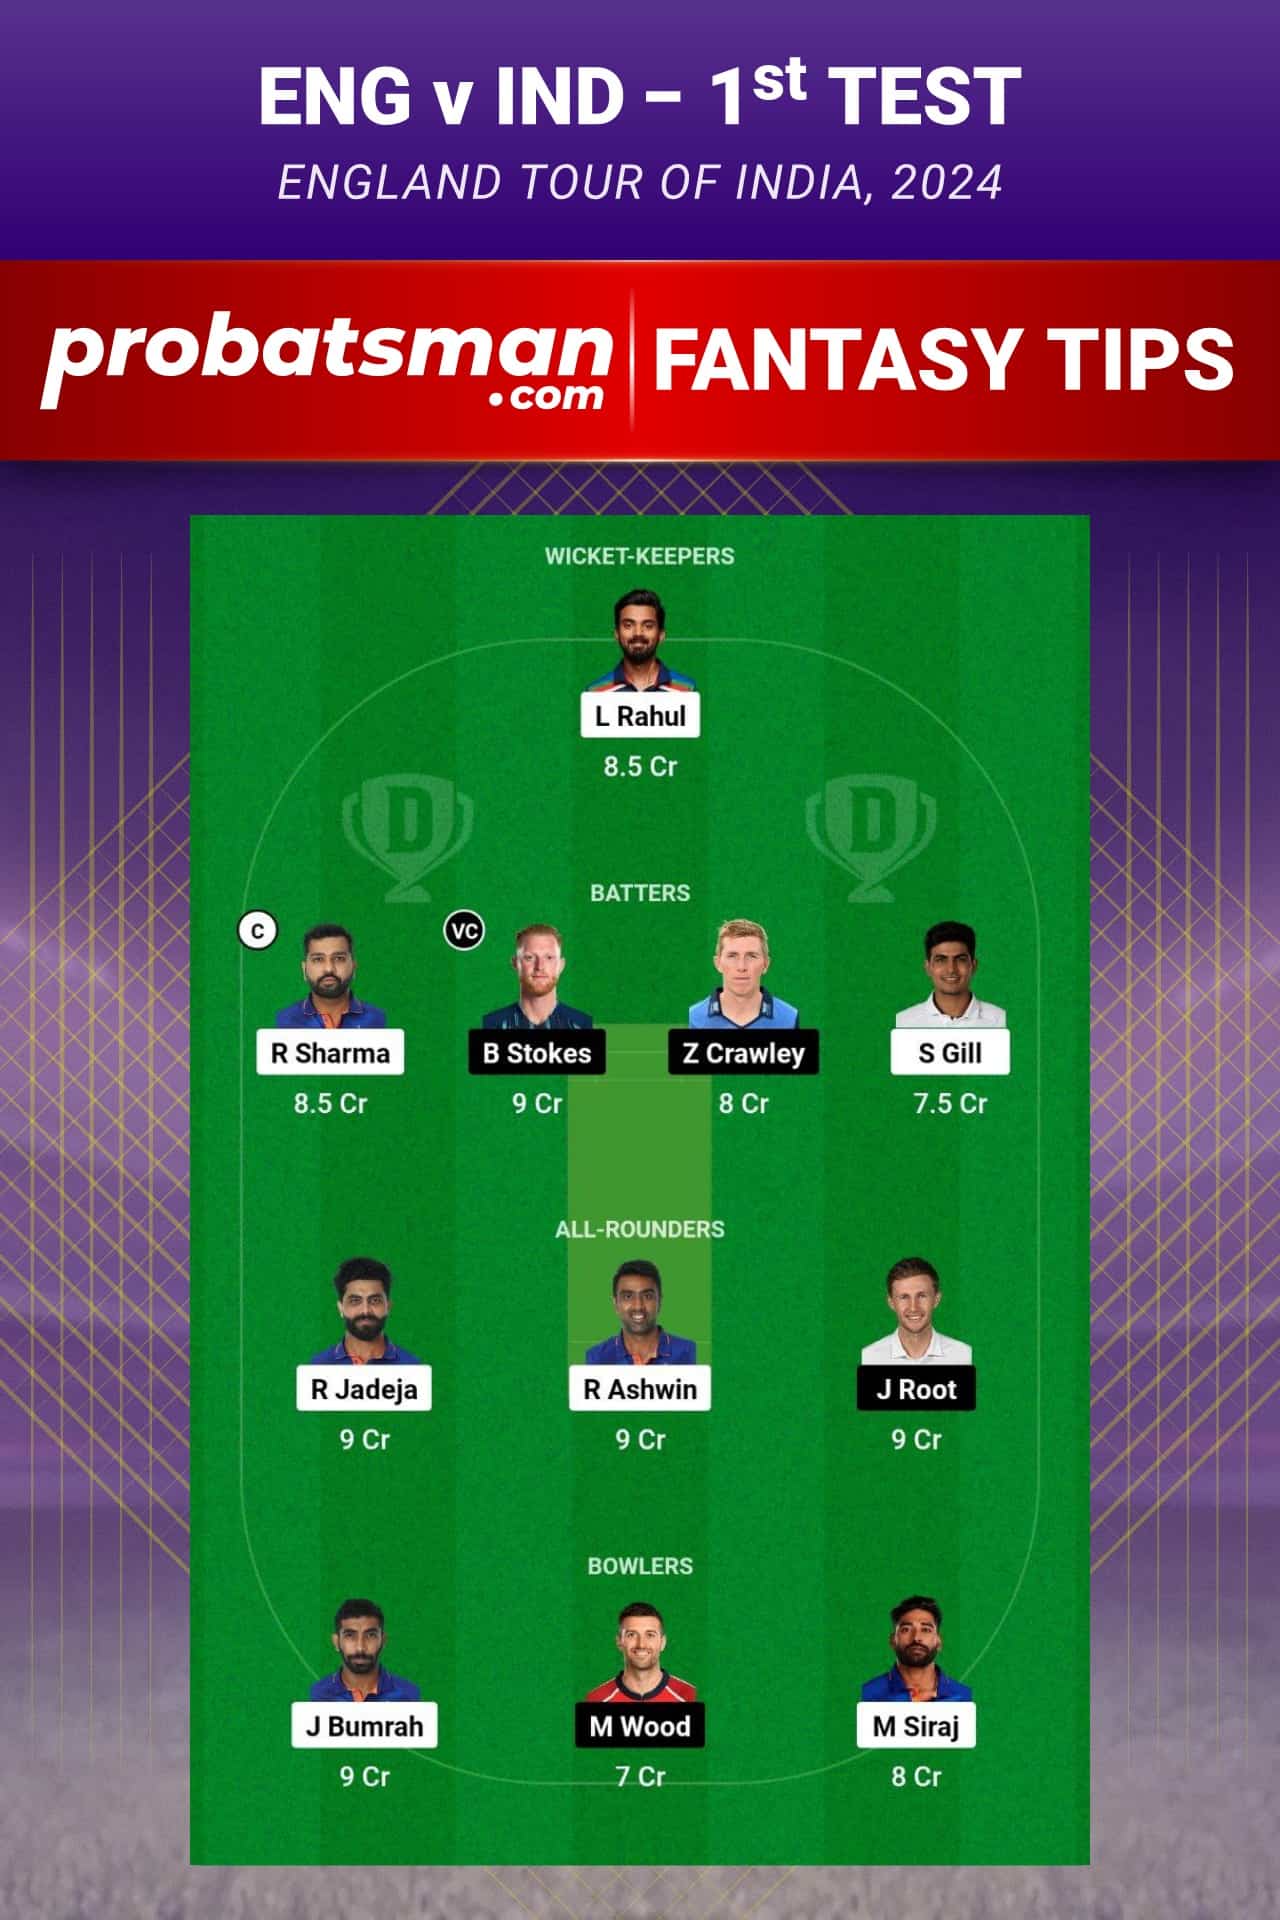 1st Test - IND vs ENG Dream11 Prediction Fantasy Team 2 - England tour of India, 2024